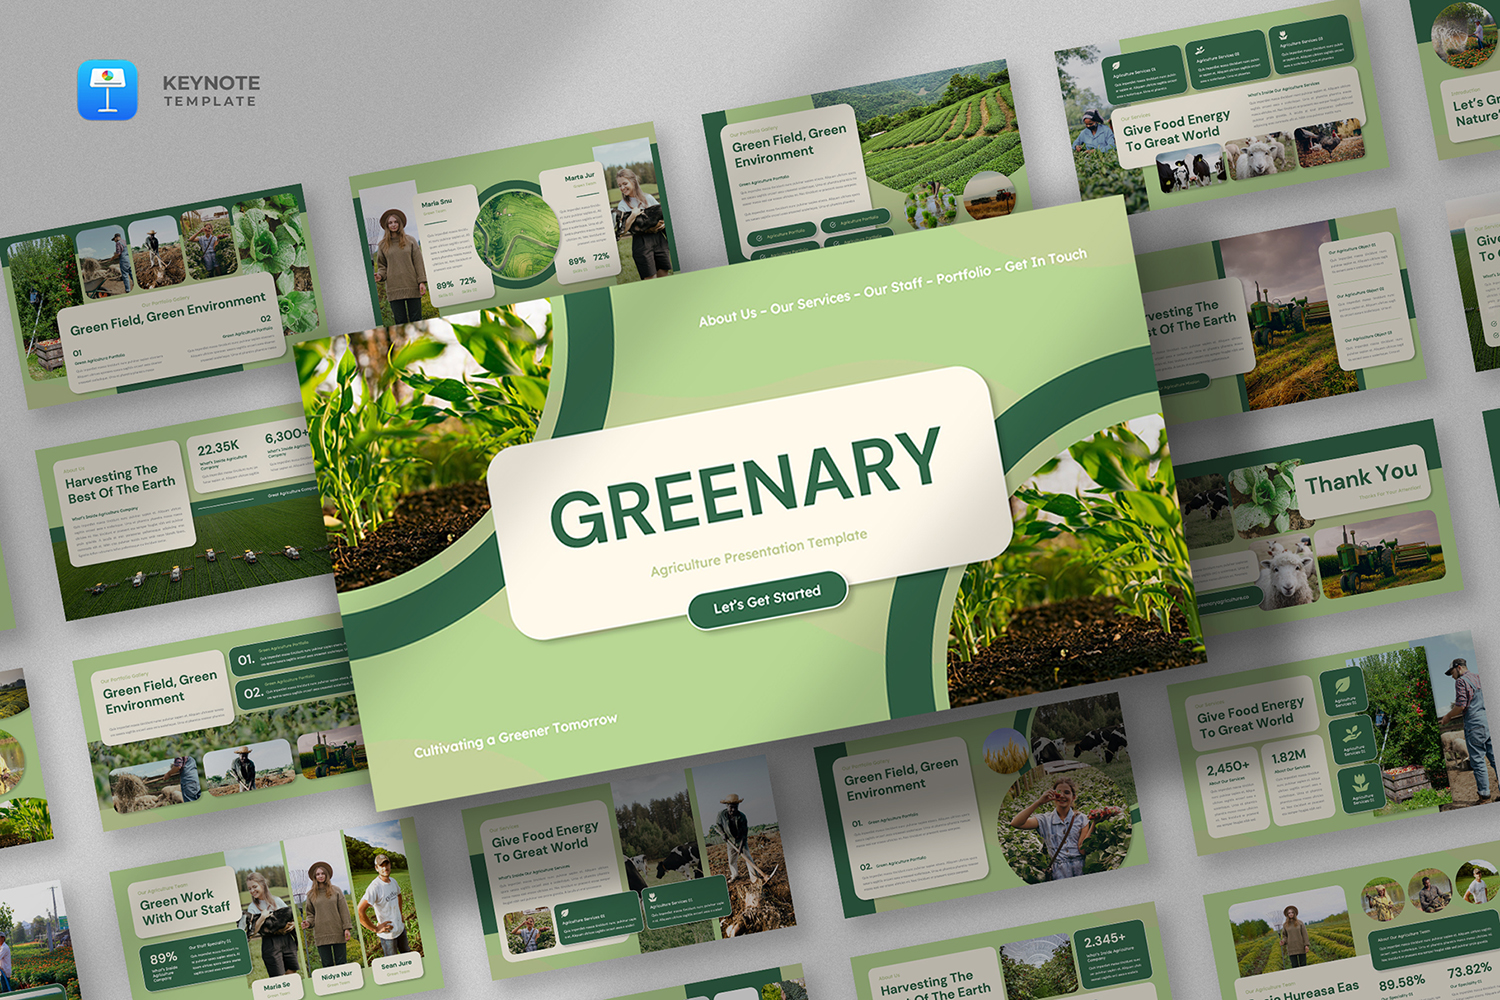 Greenary - Agriculture Keynote Template